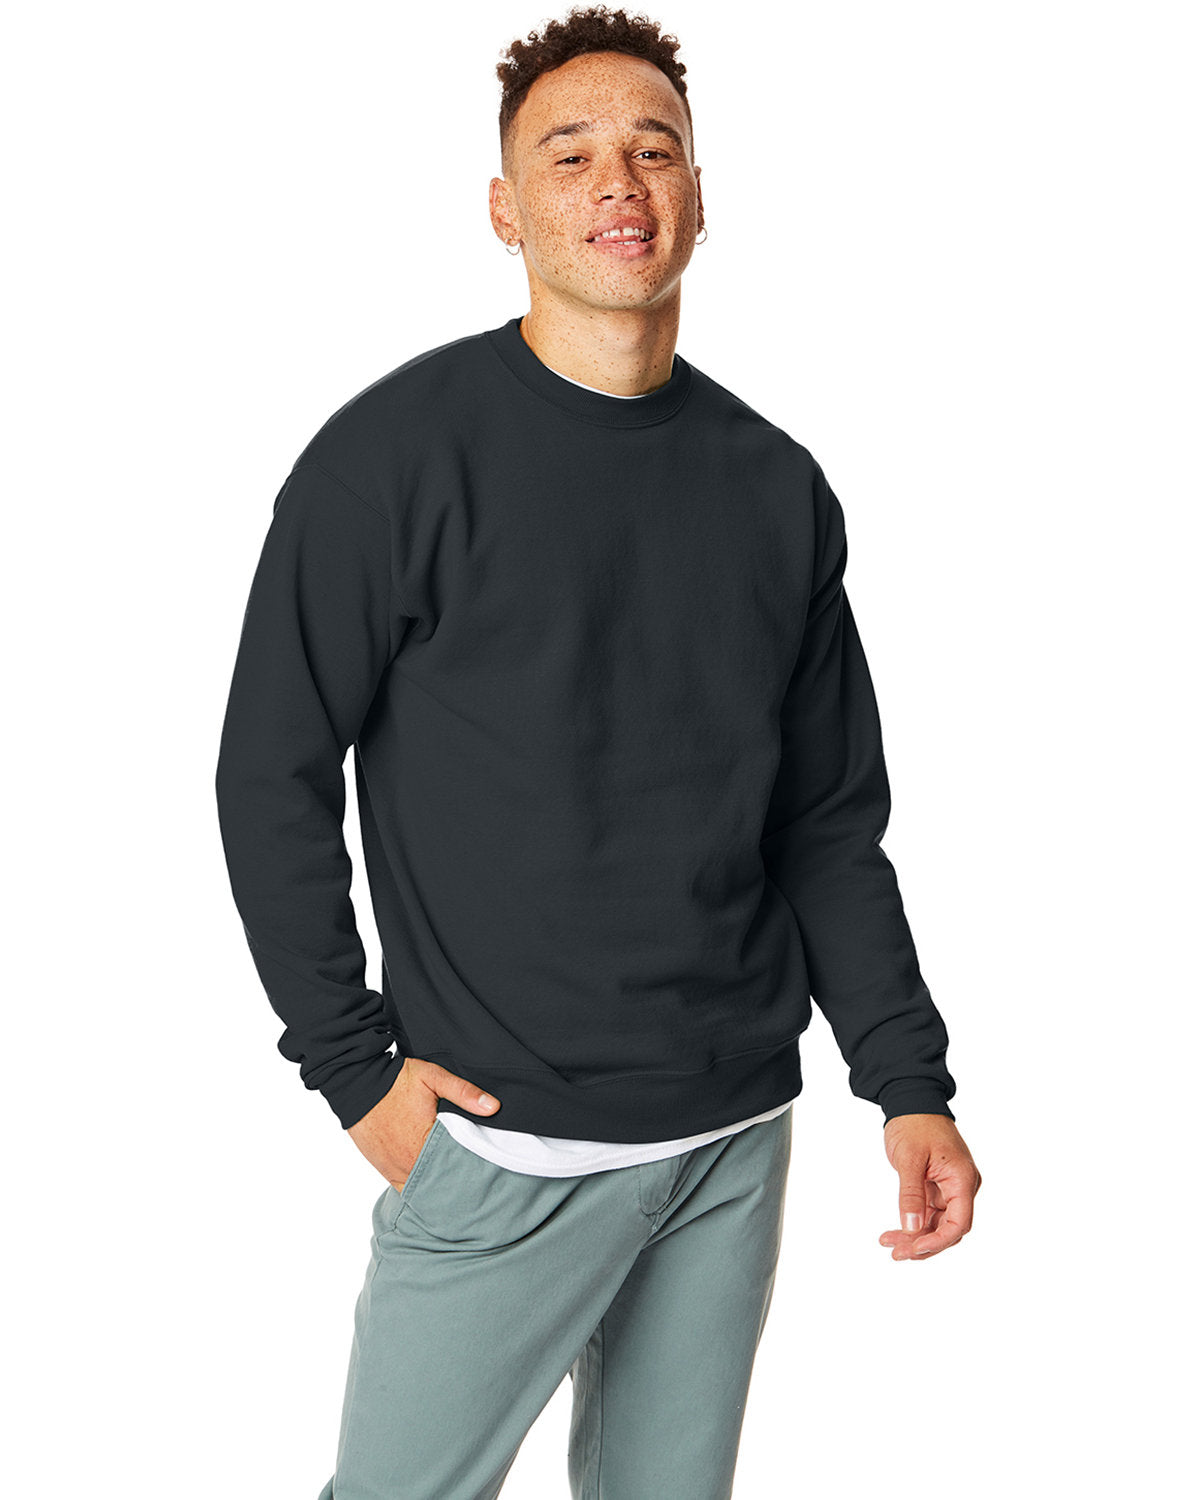 Cropped hoodie hack: Cutoff Hanes Ecosmart Pullover (shown with